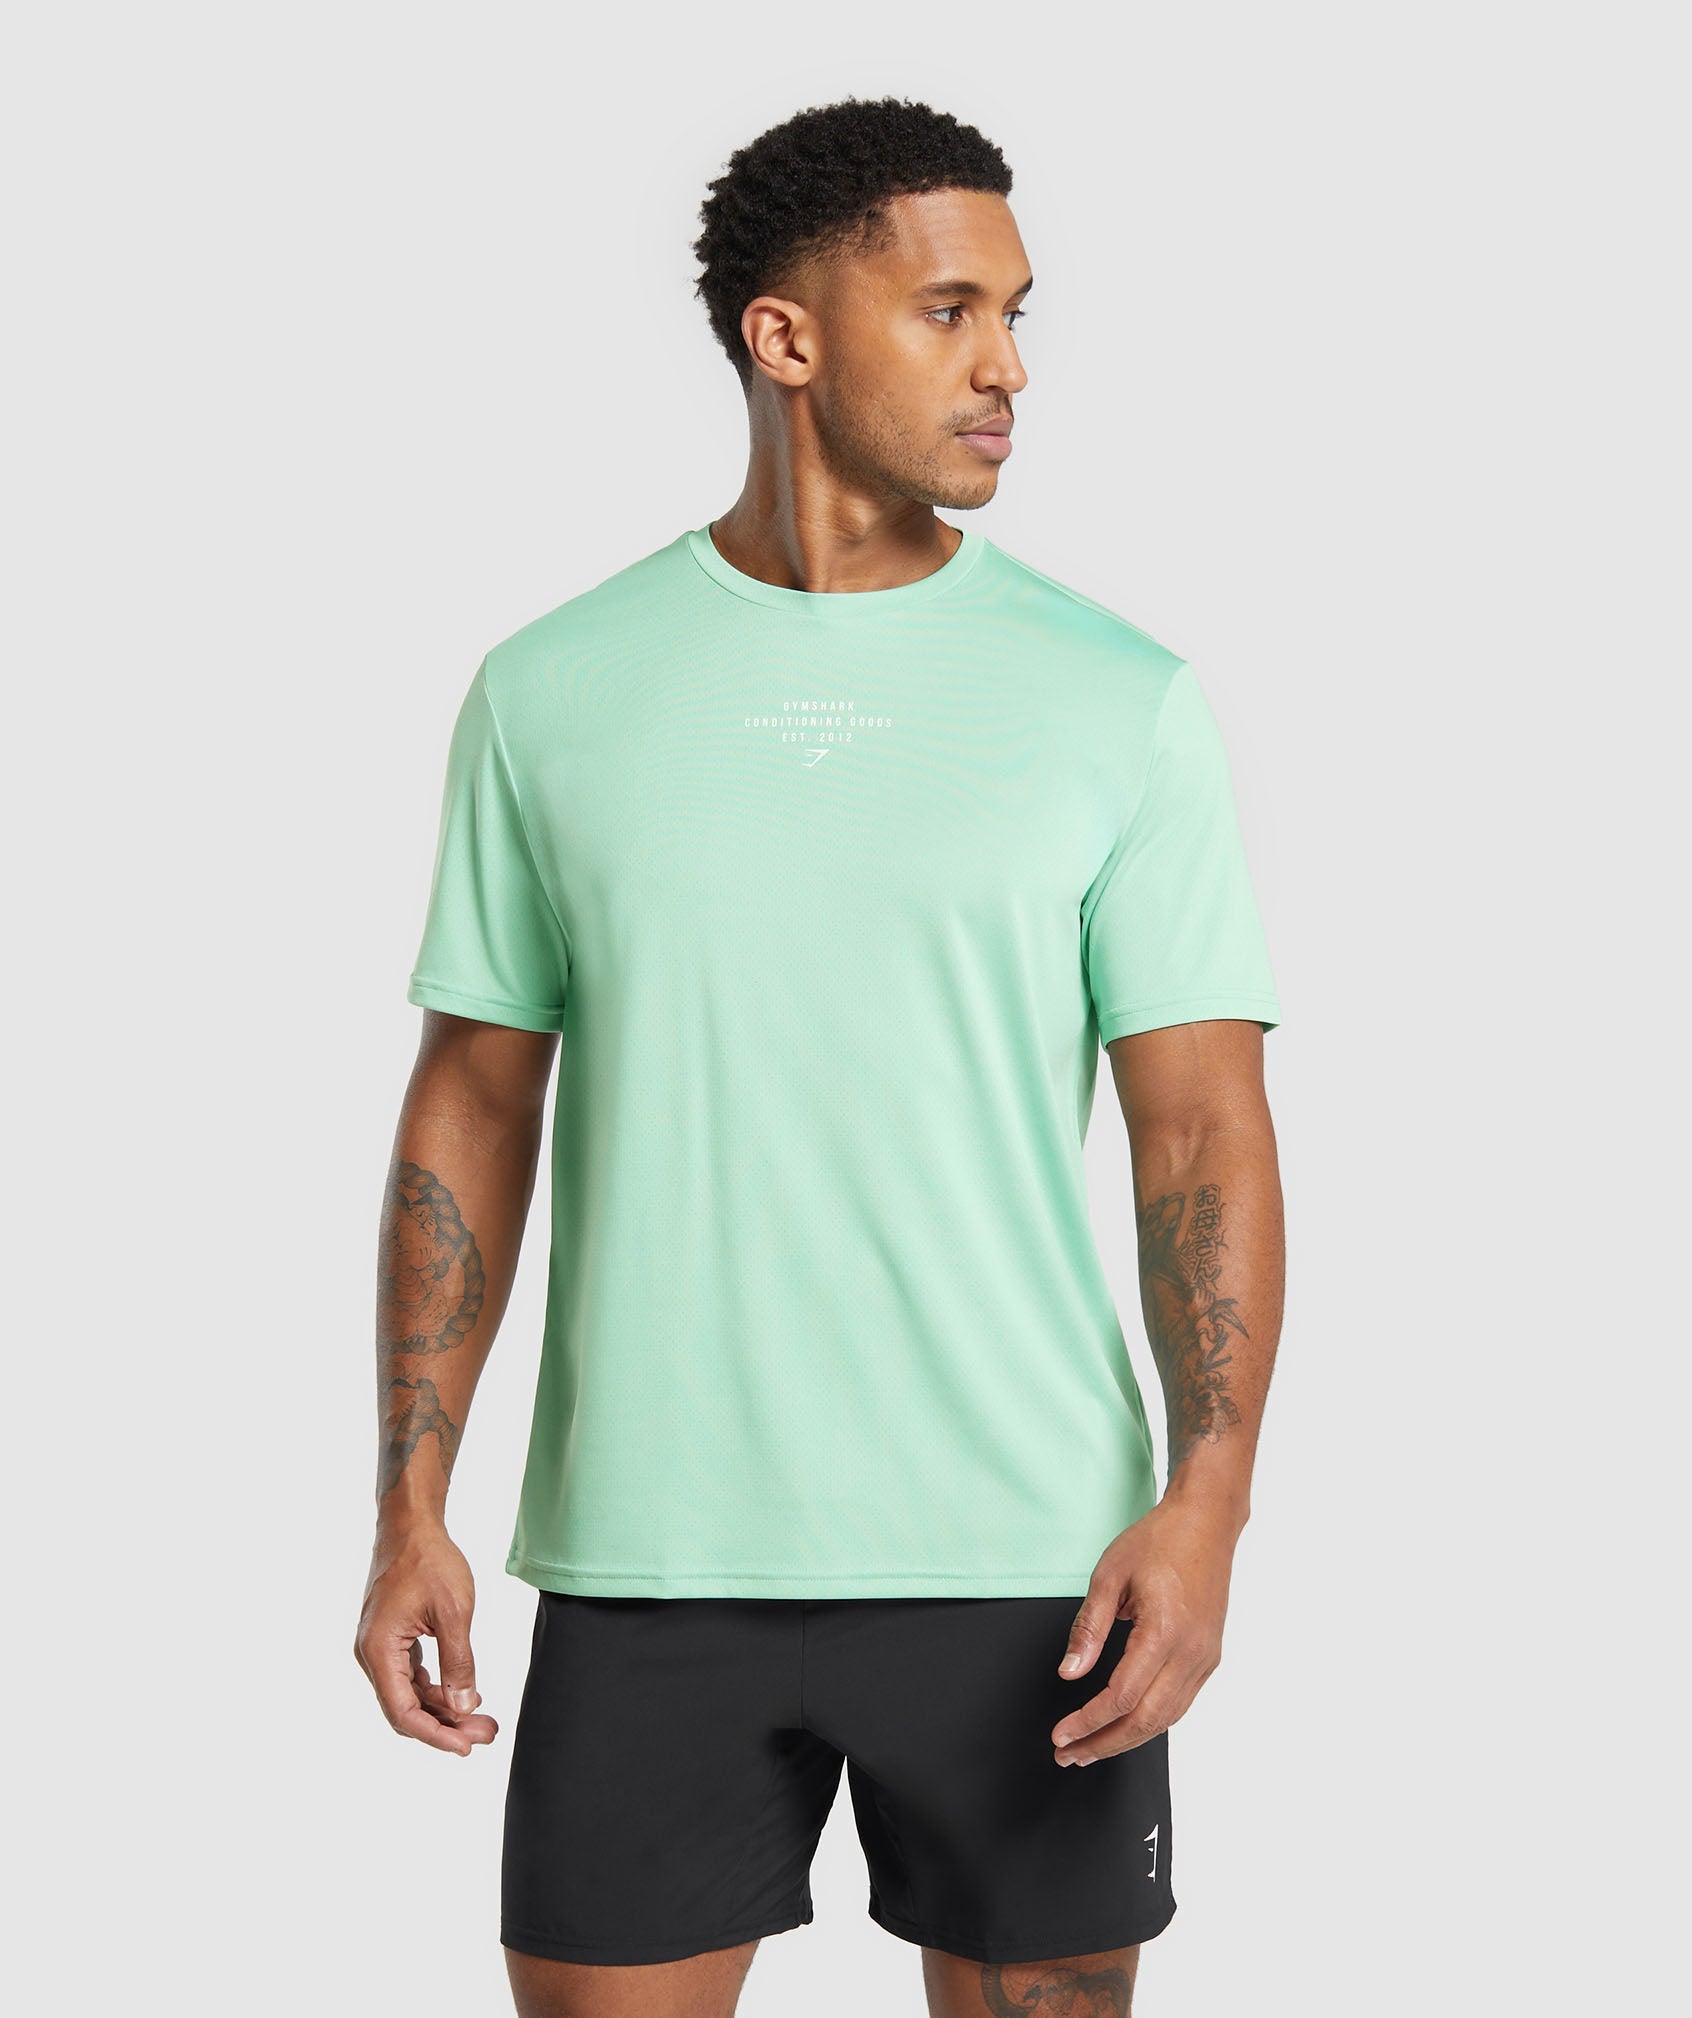 Conditioning Goods T-Shirt in Lido Green